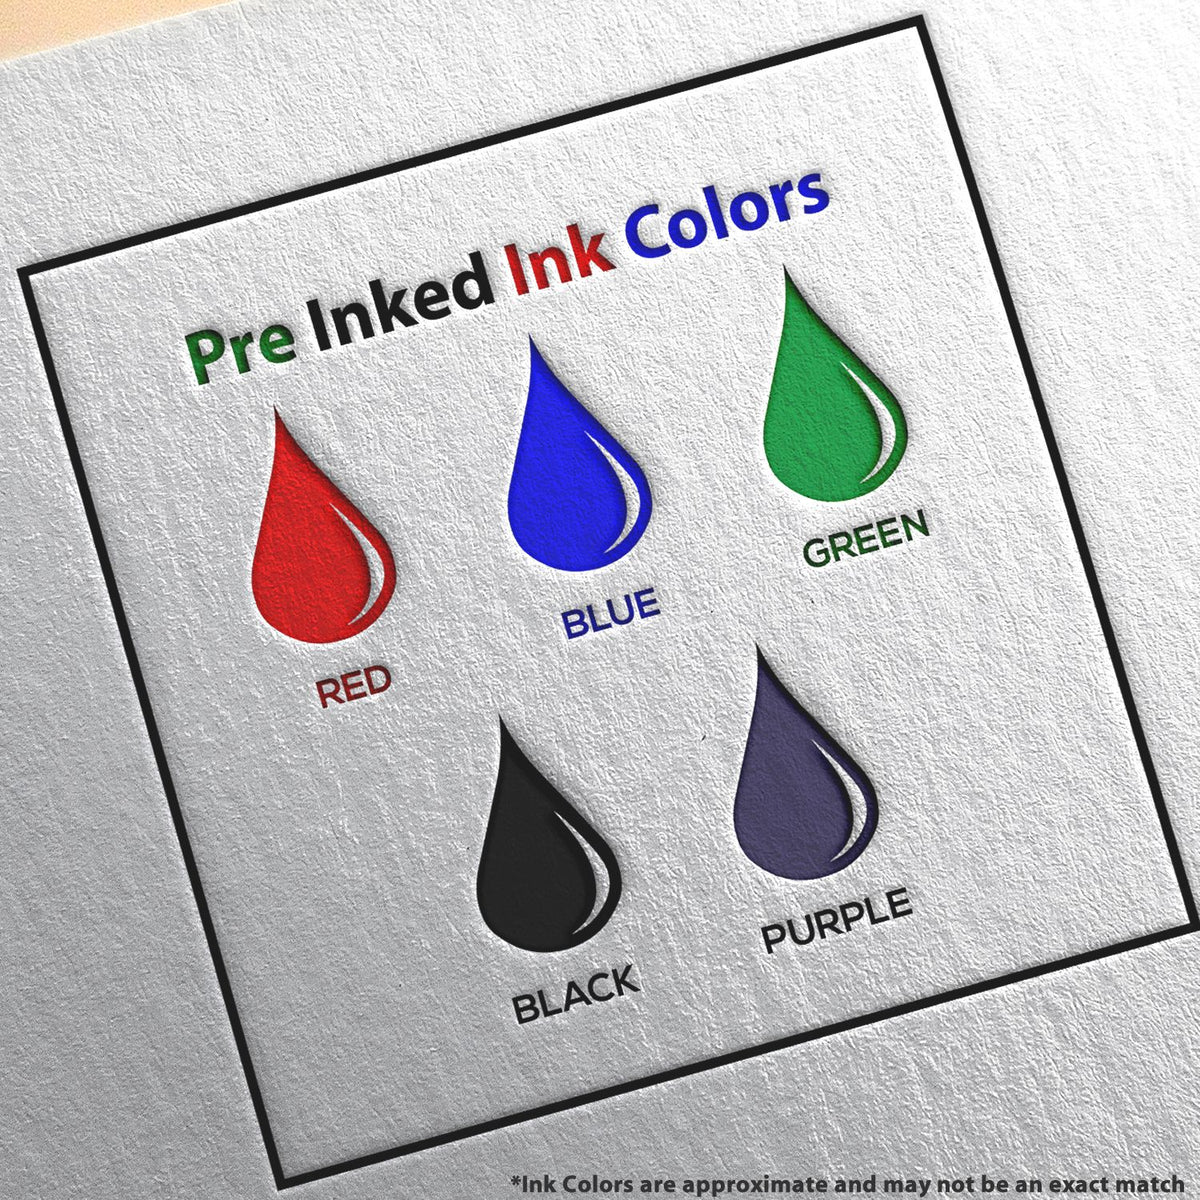 A picture showing the different ink colors or hues available for the Premium MaxLight Pre-Inked Texas Engineering Stamp product.